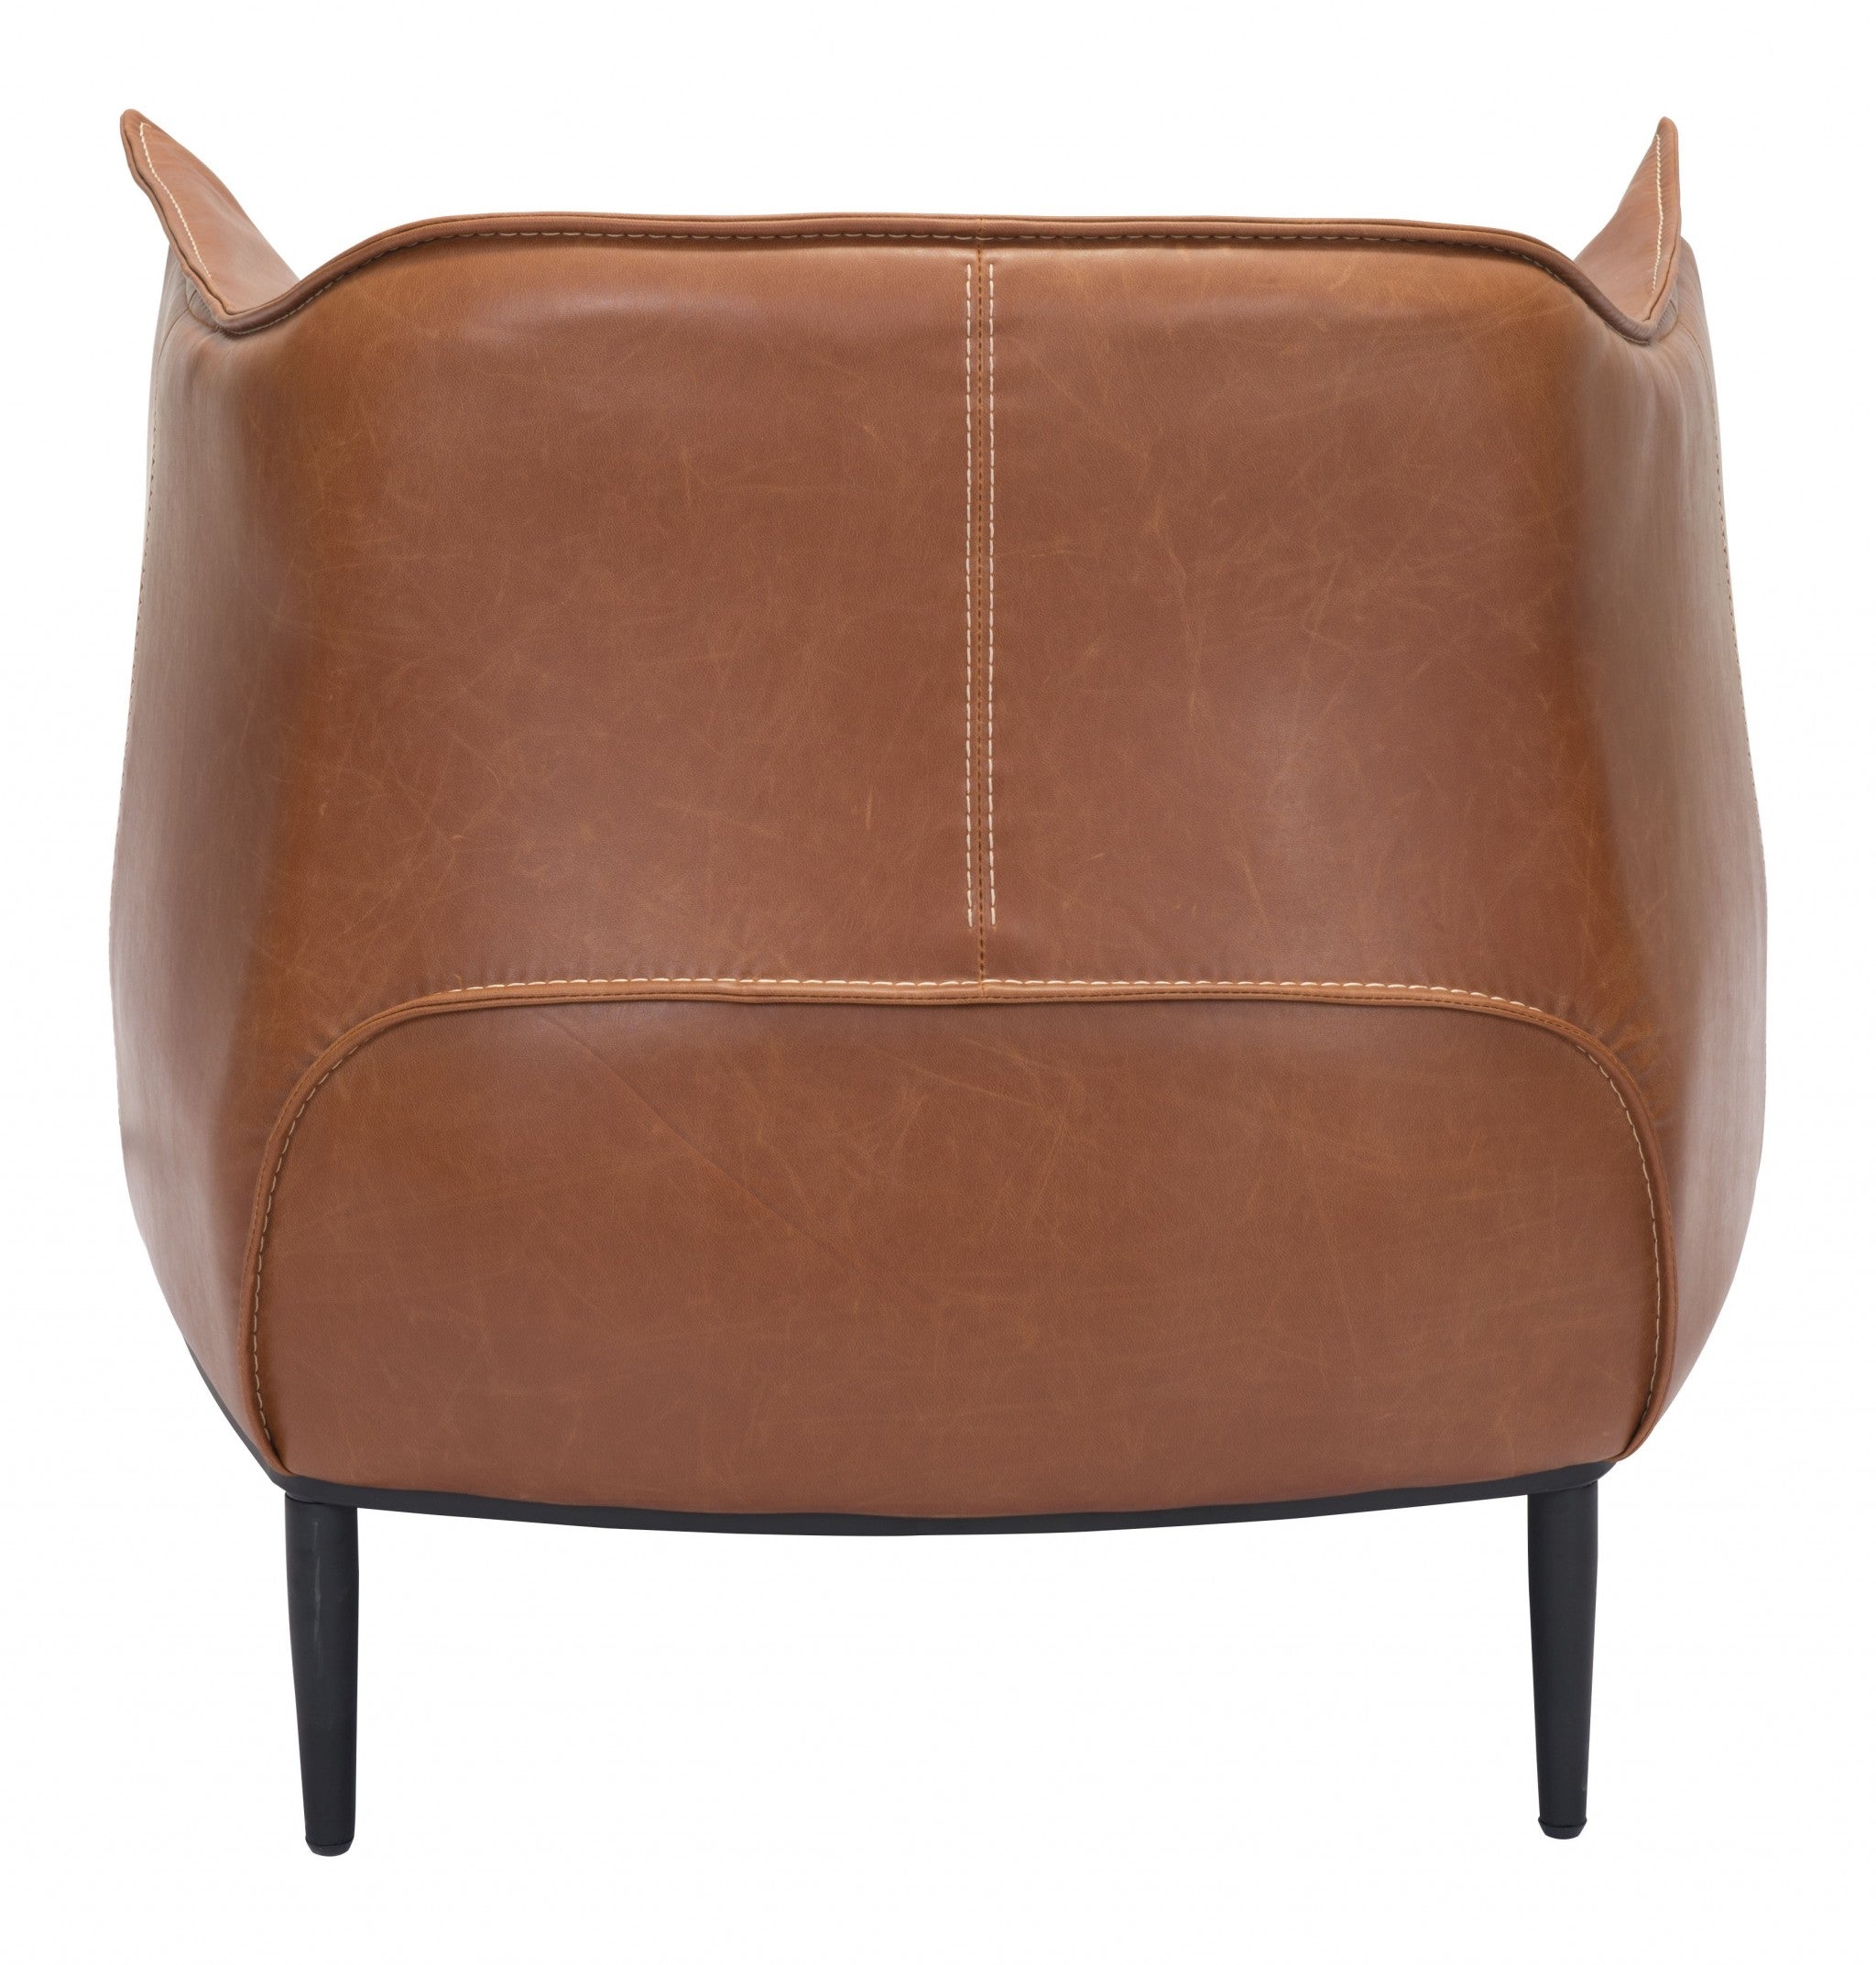 35" Coffee And Brown Faux Leather Barrel Chair